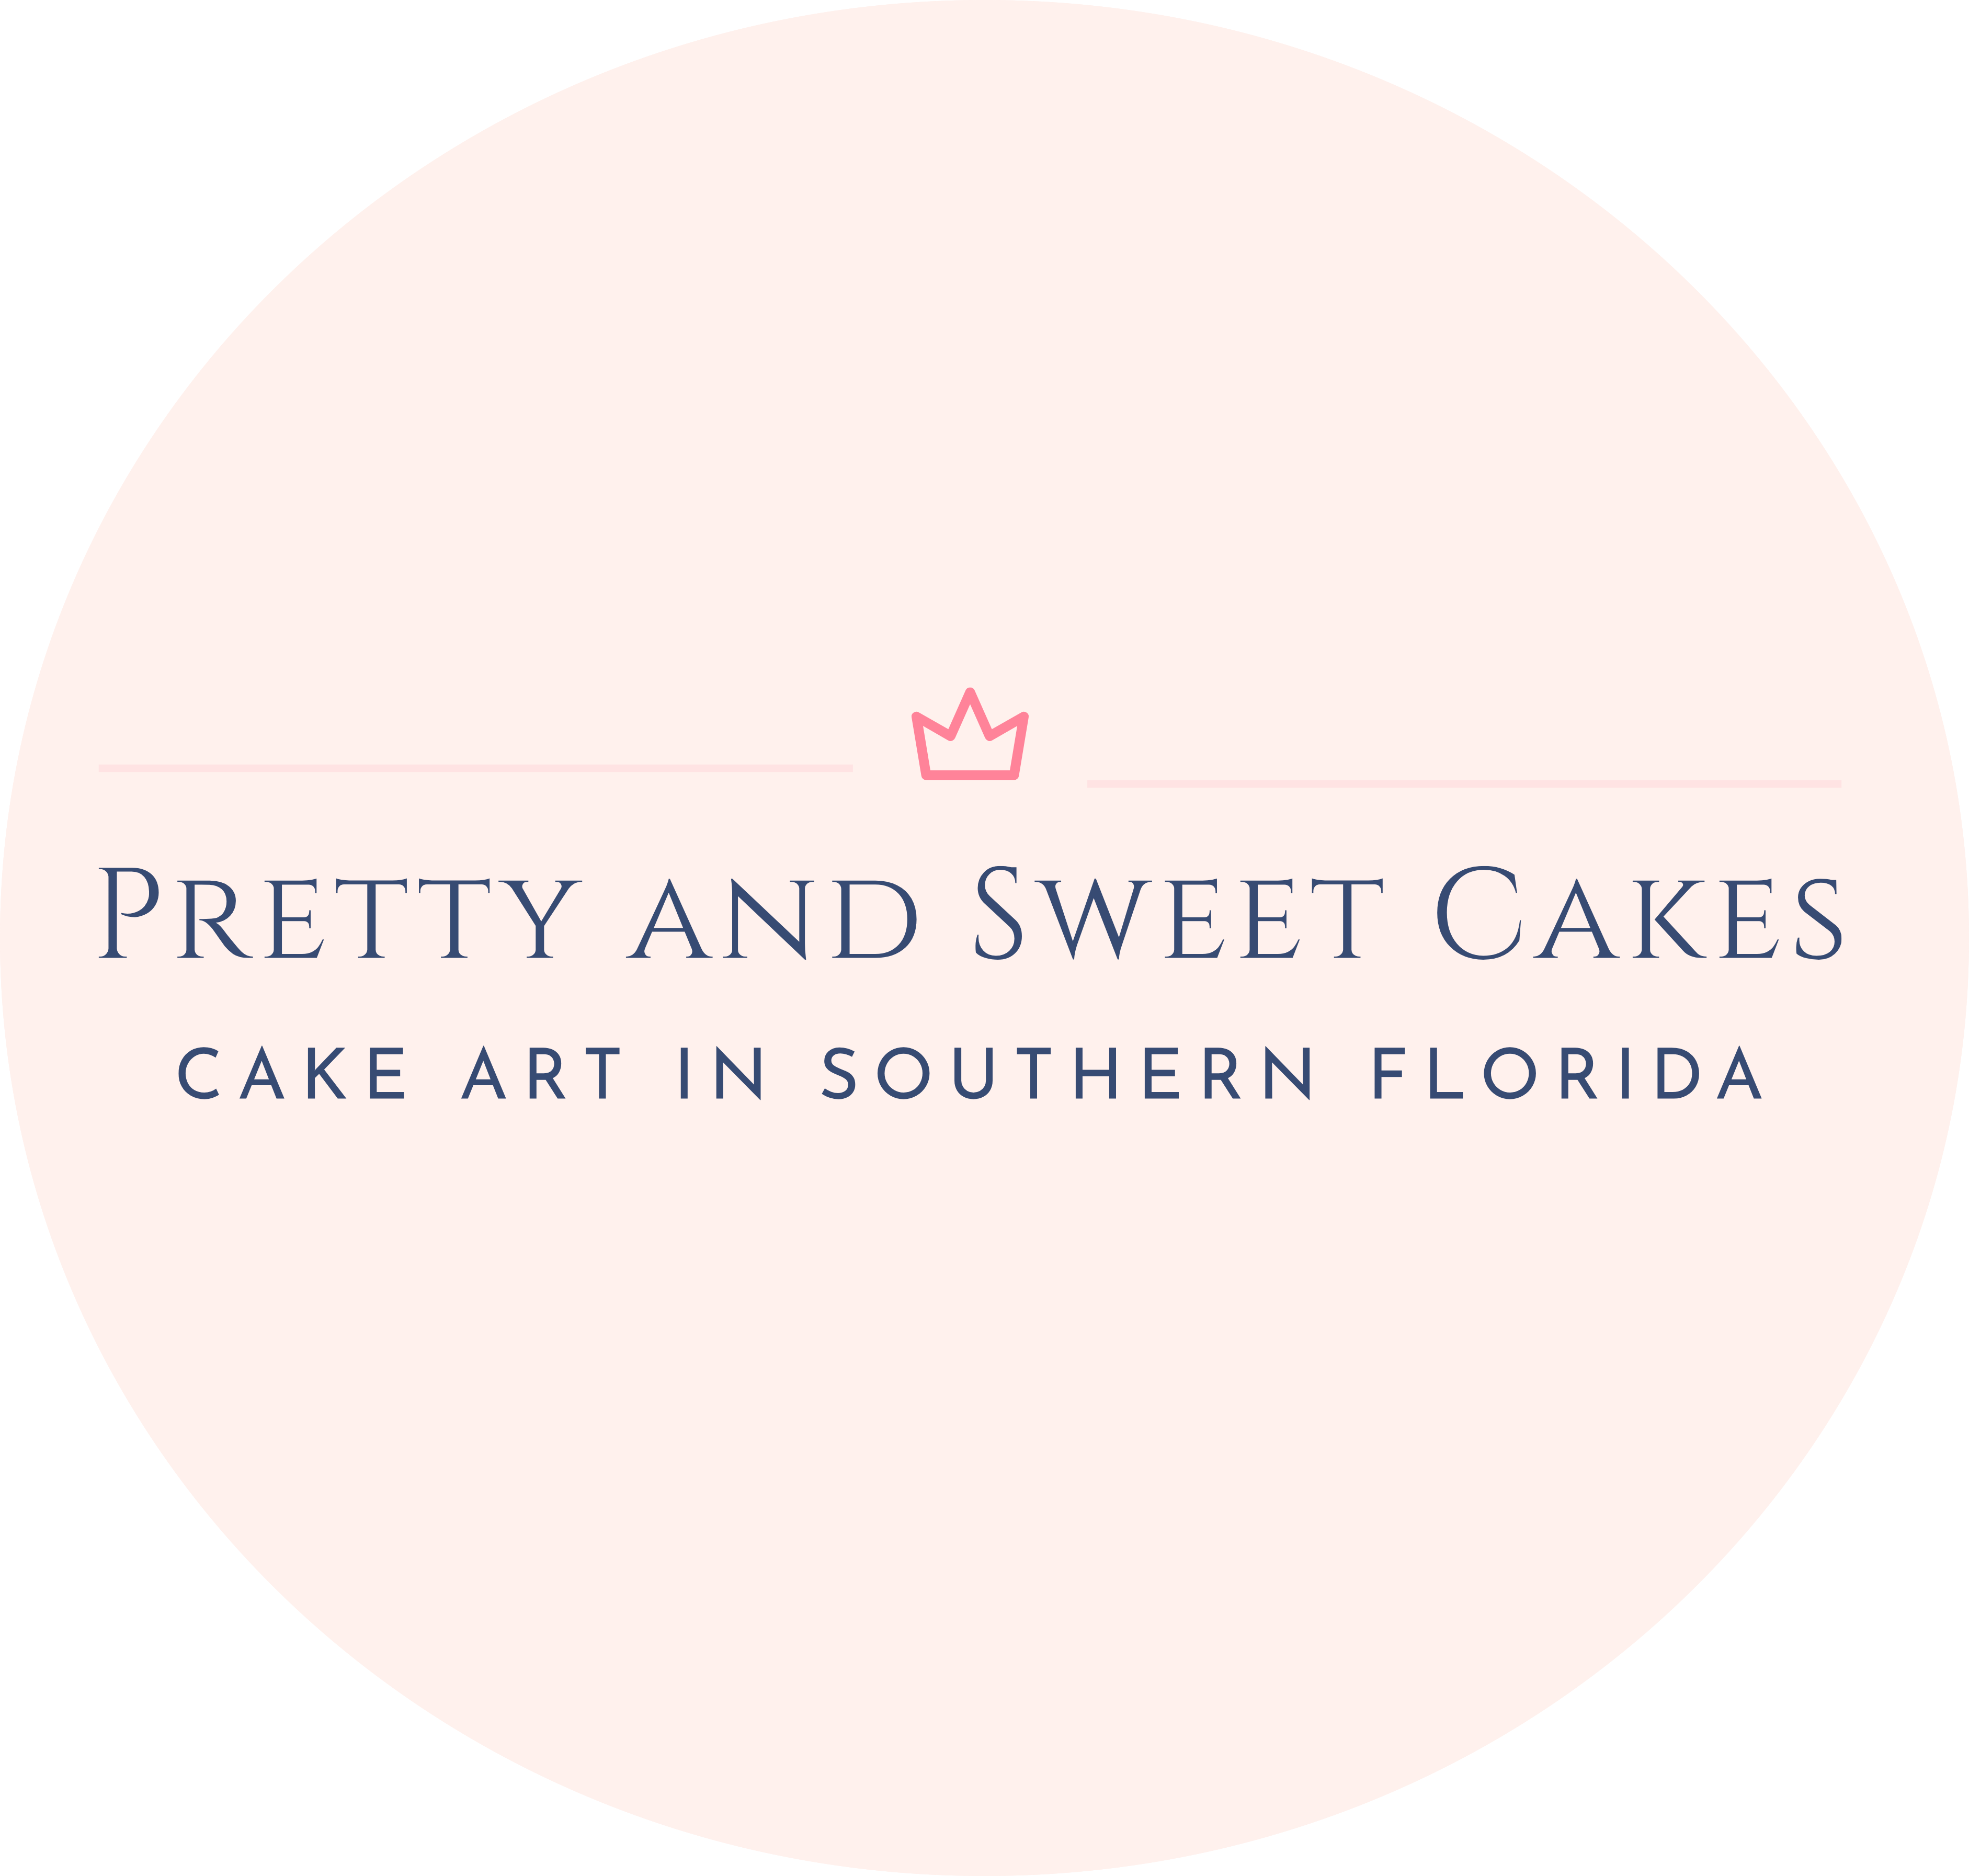 Pretty and Sweet Cakes